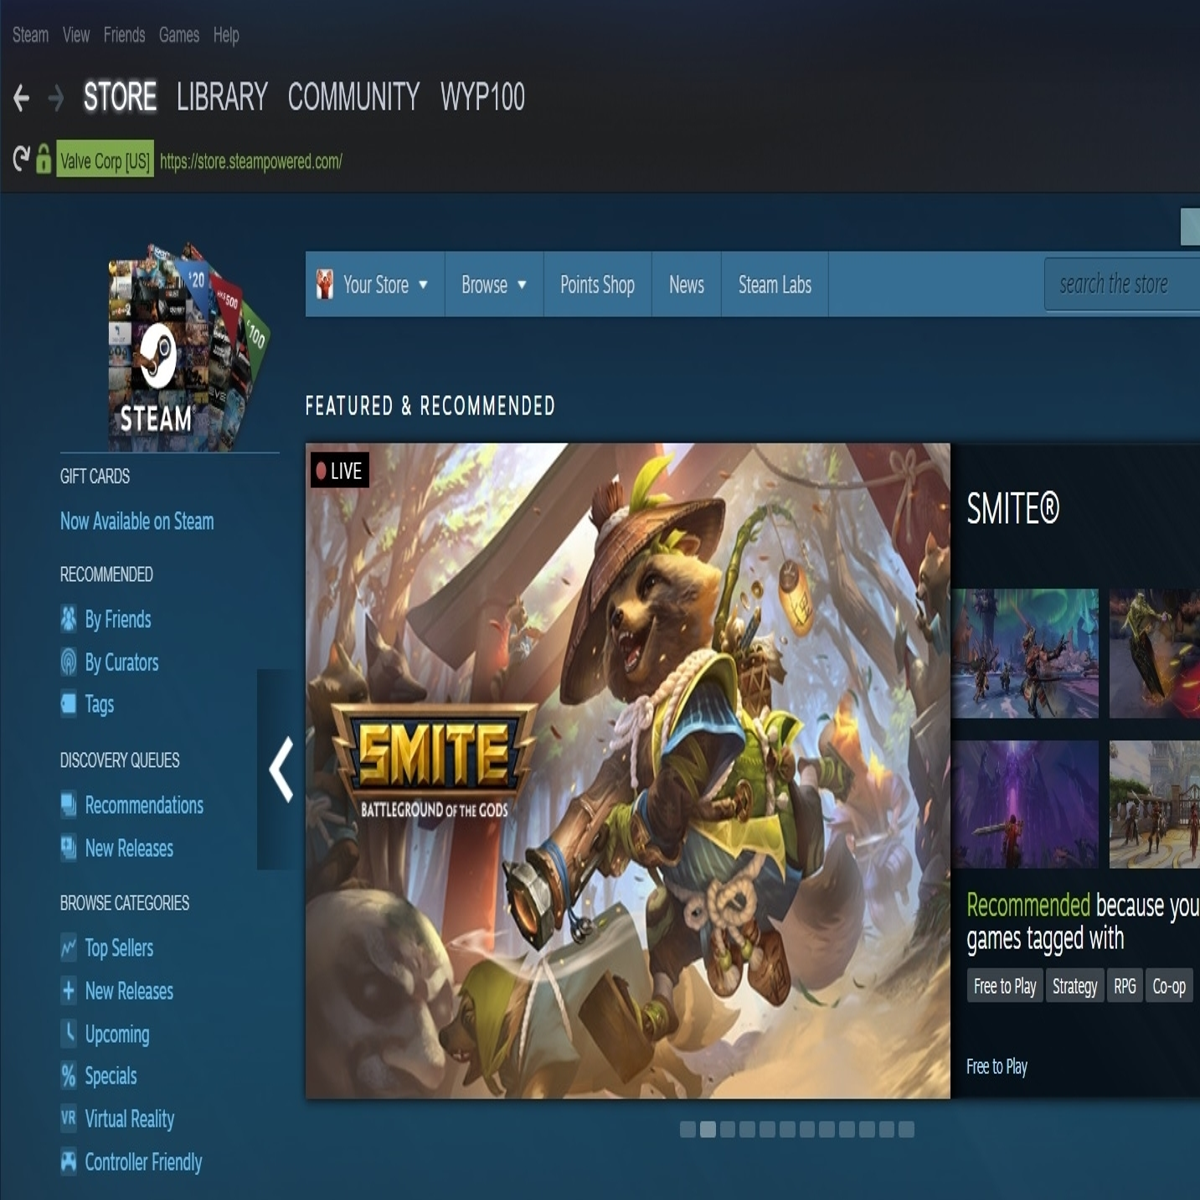 Steam hits over 14 million concurrent users online